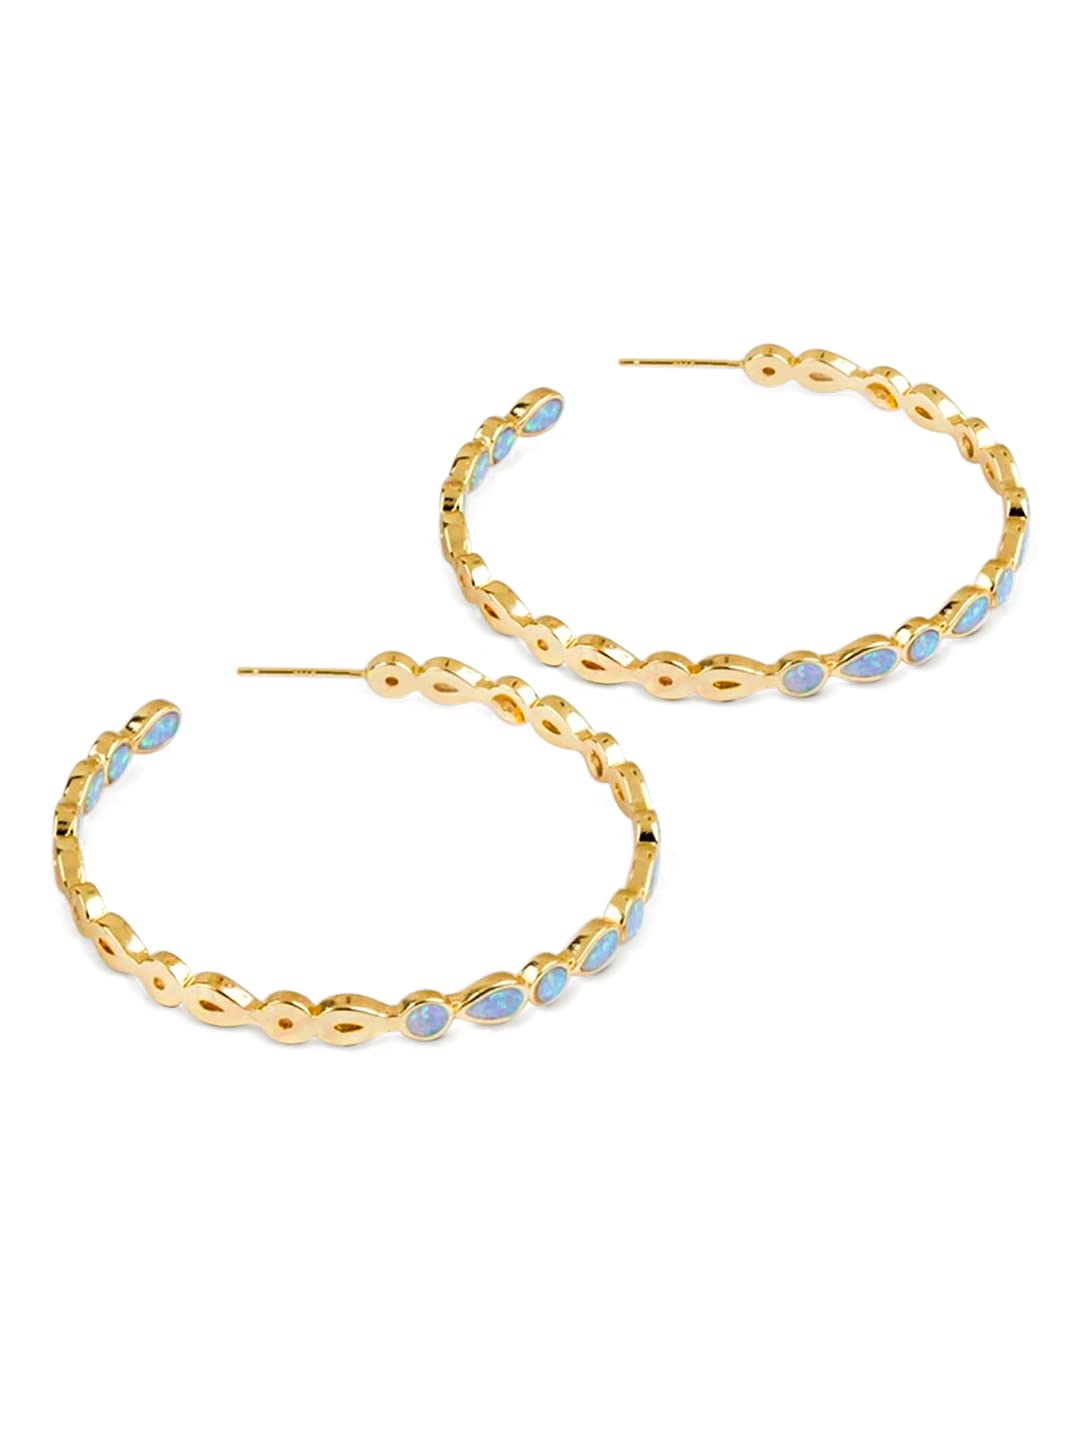 Yellow Chimes Earrings For Women Blue Color Hoop Earring For Women and Girl